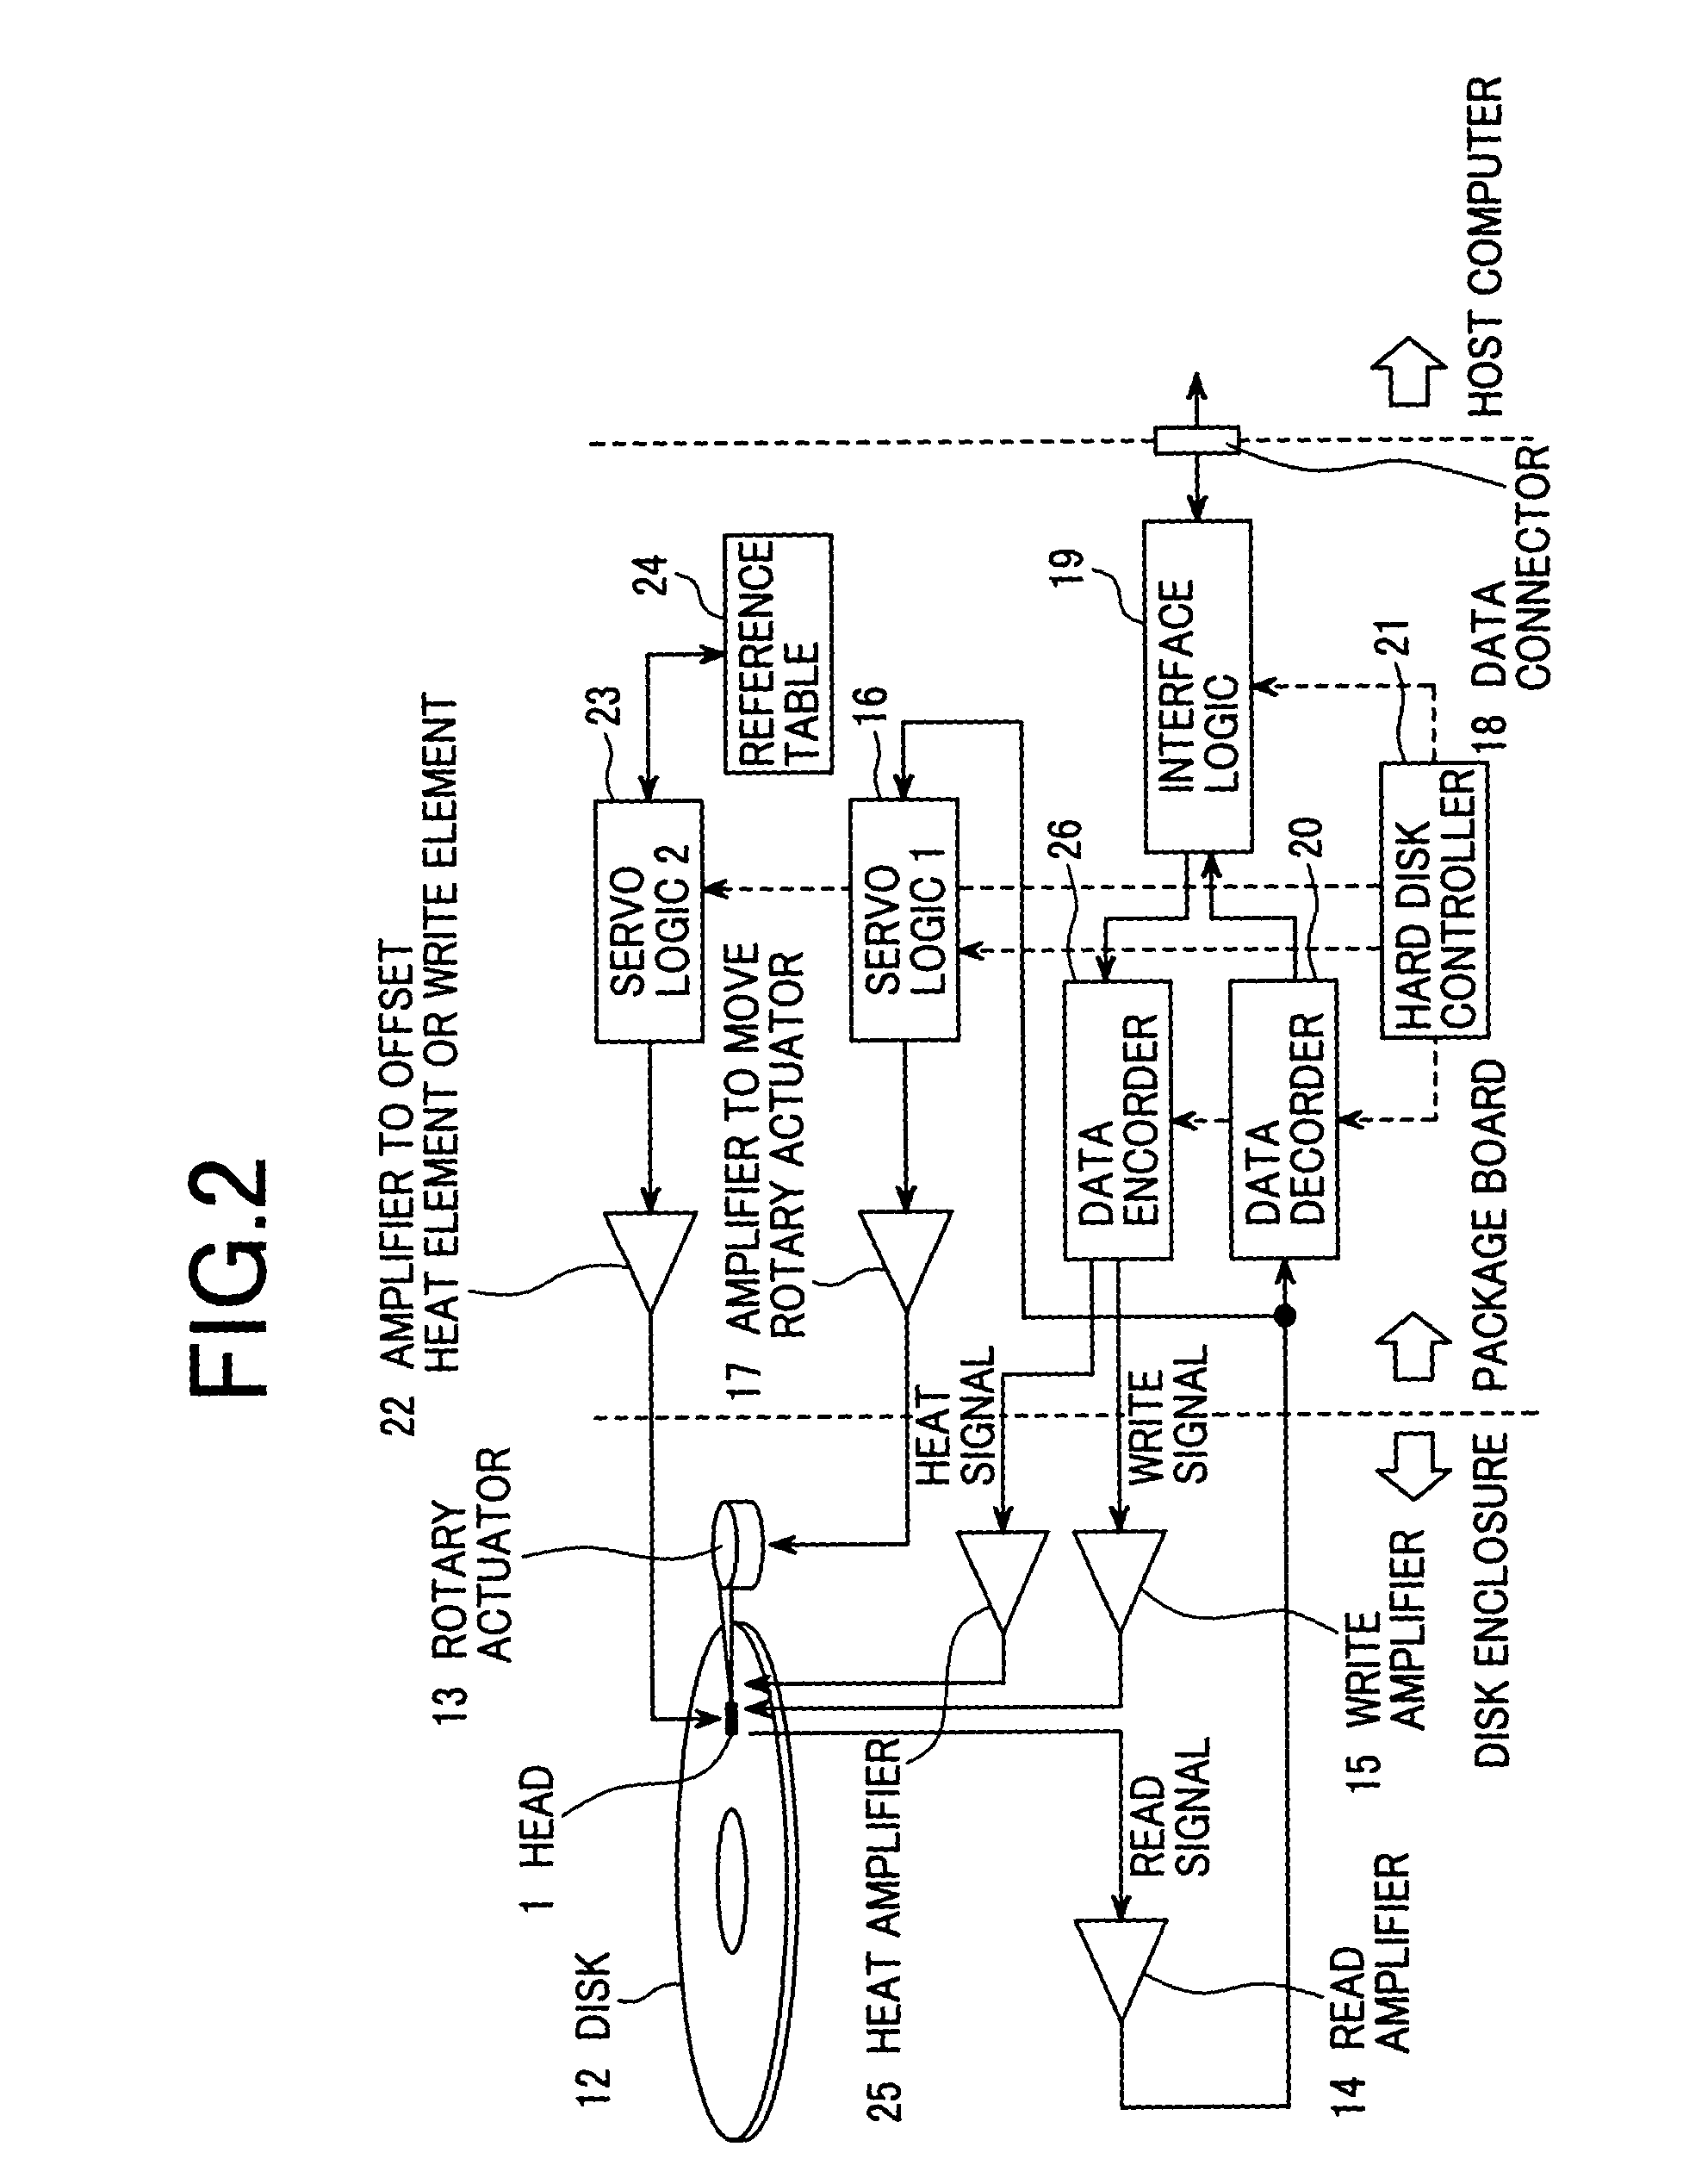 Magnetic disk apparatus having an adjustable mechanism to compensate write or heat element for off-tracking position with yaw angle